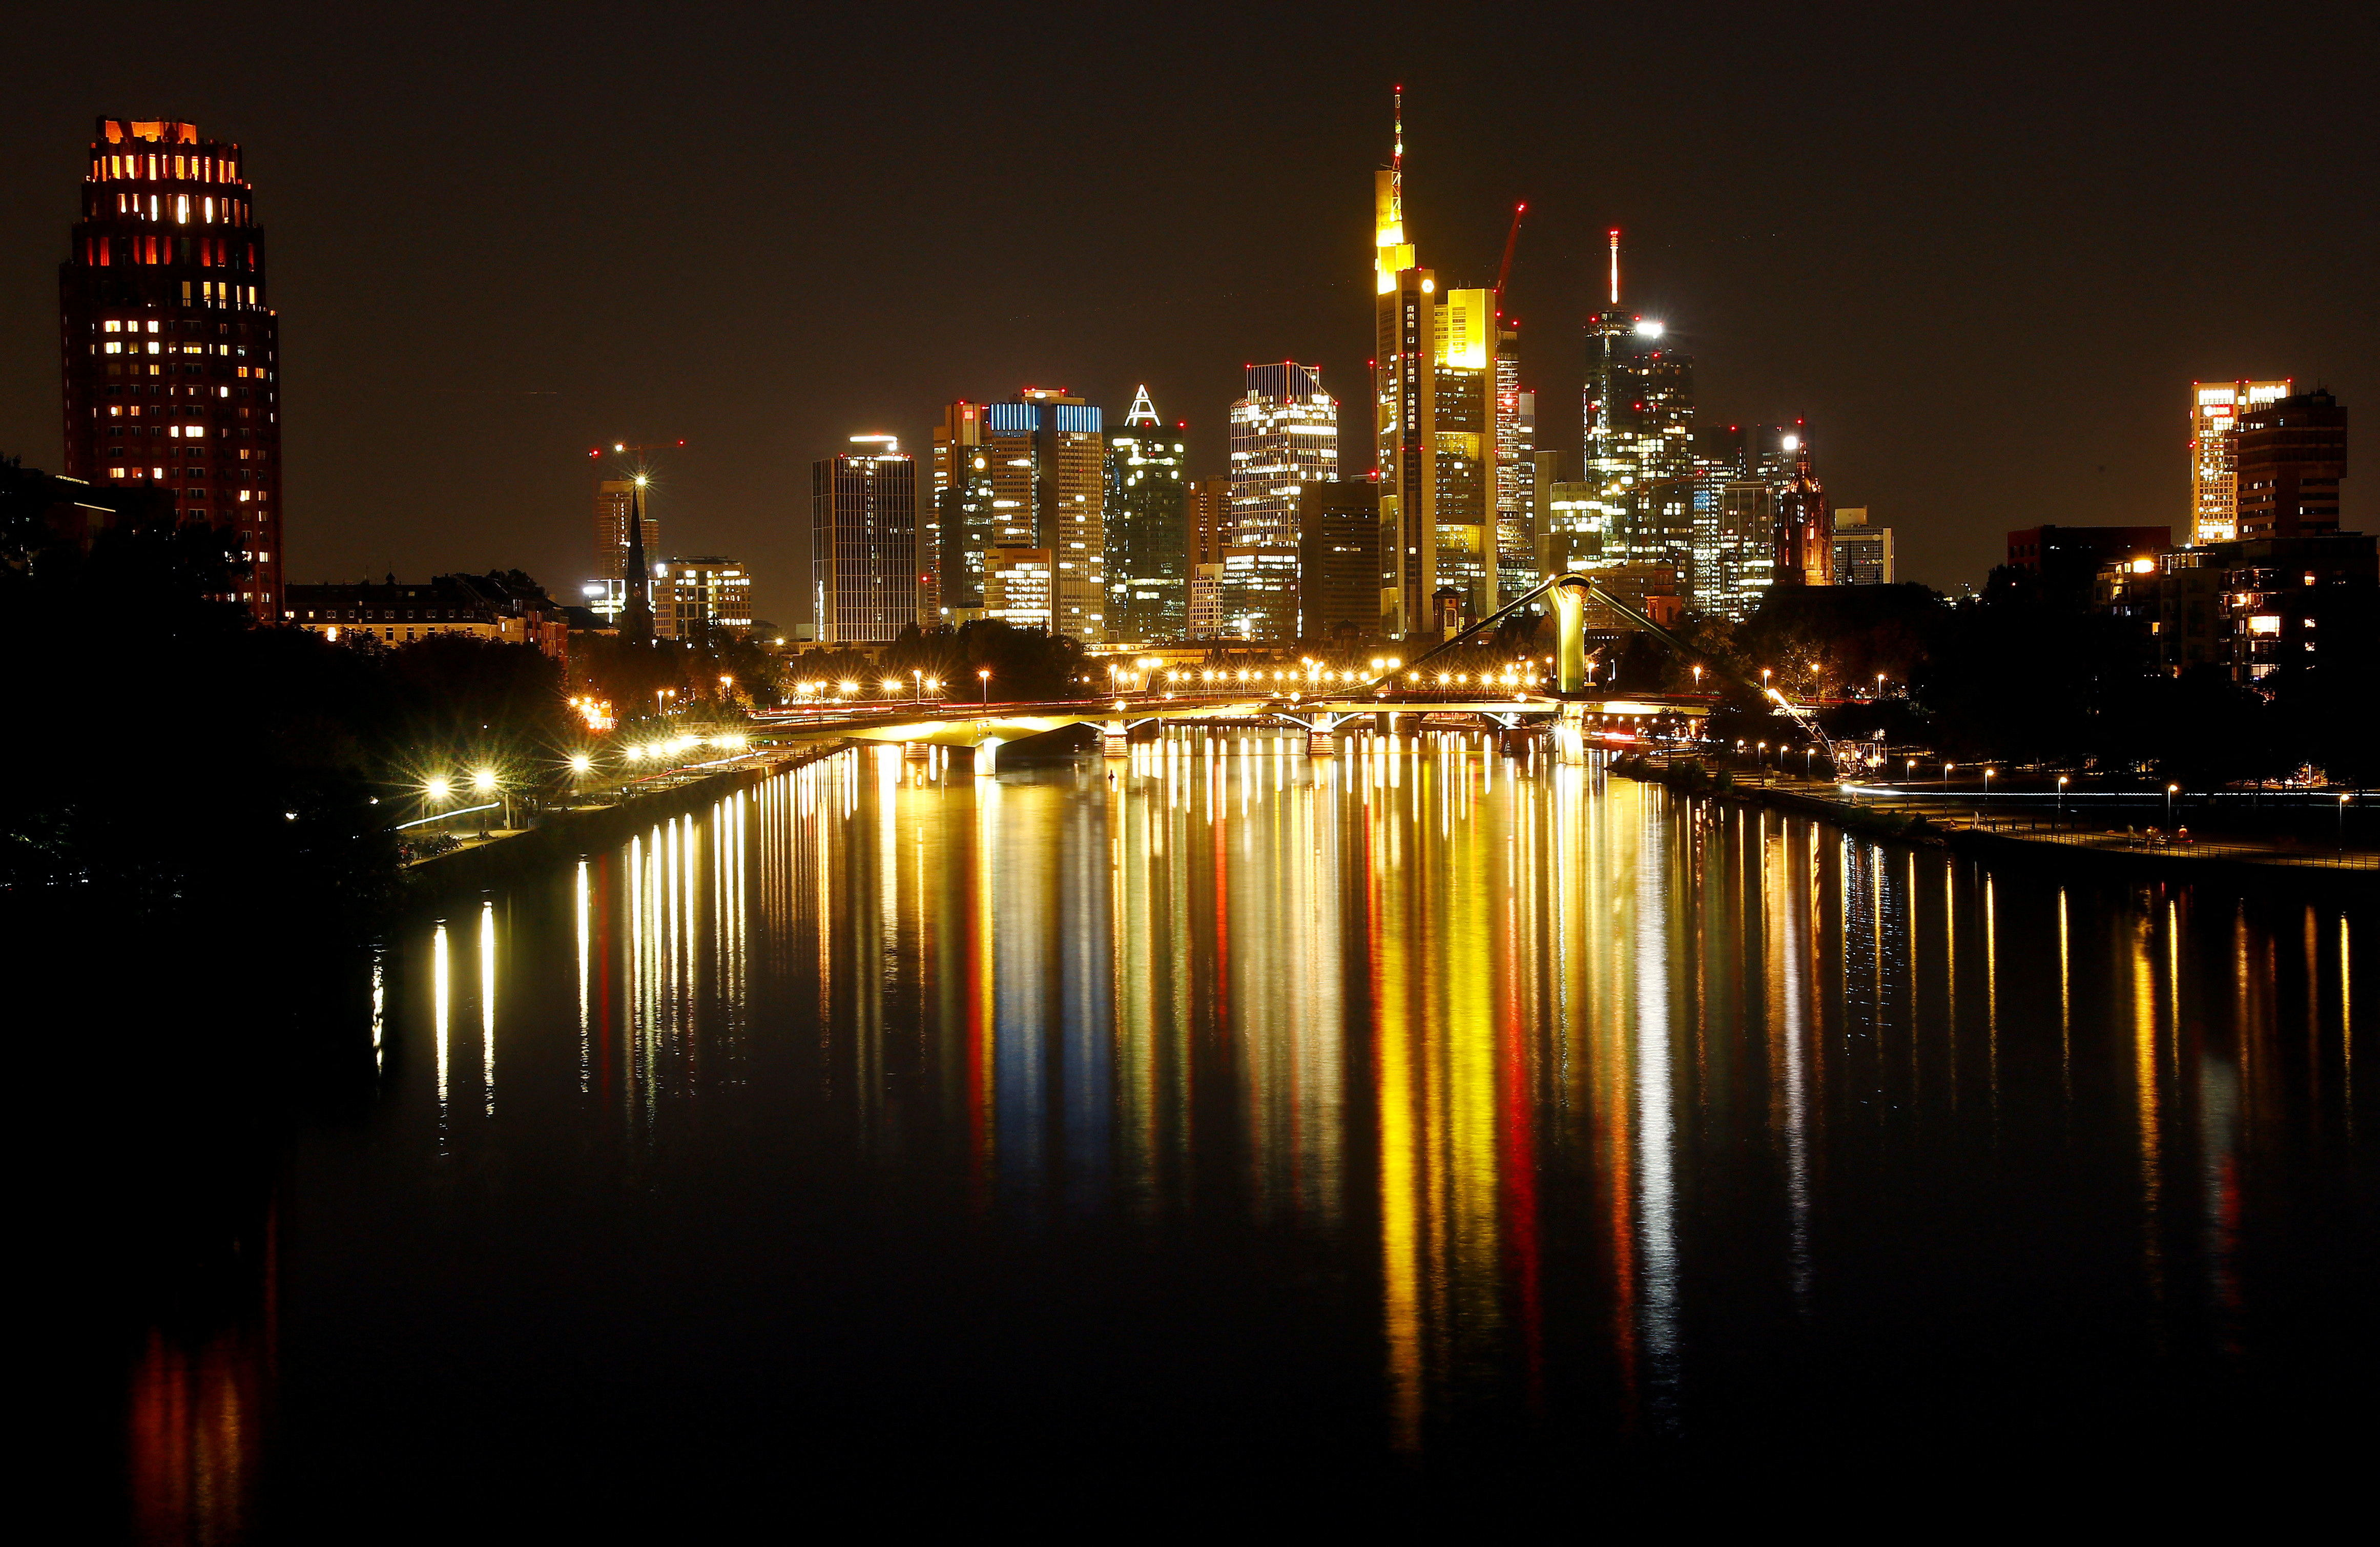 The skyline with its financial district is photographed on early evening in Frankfurt